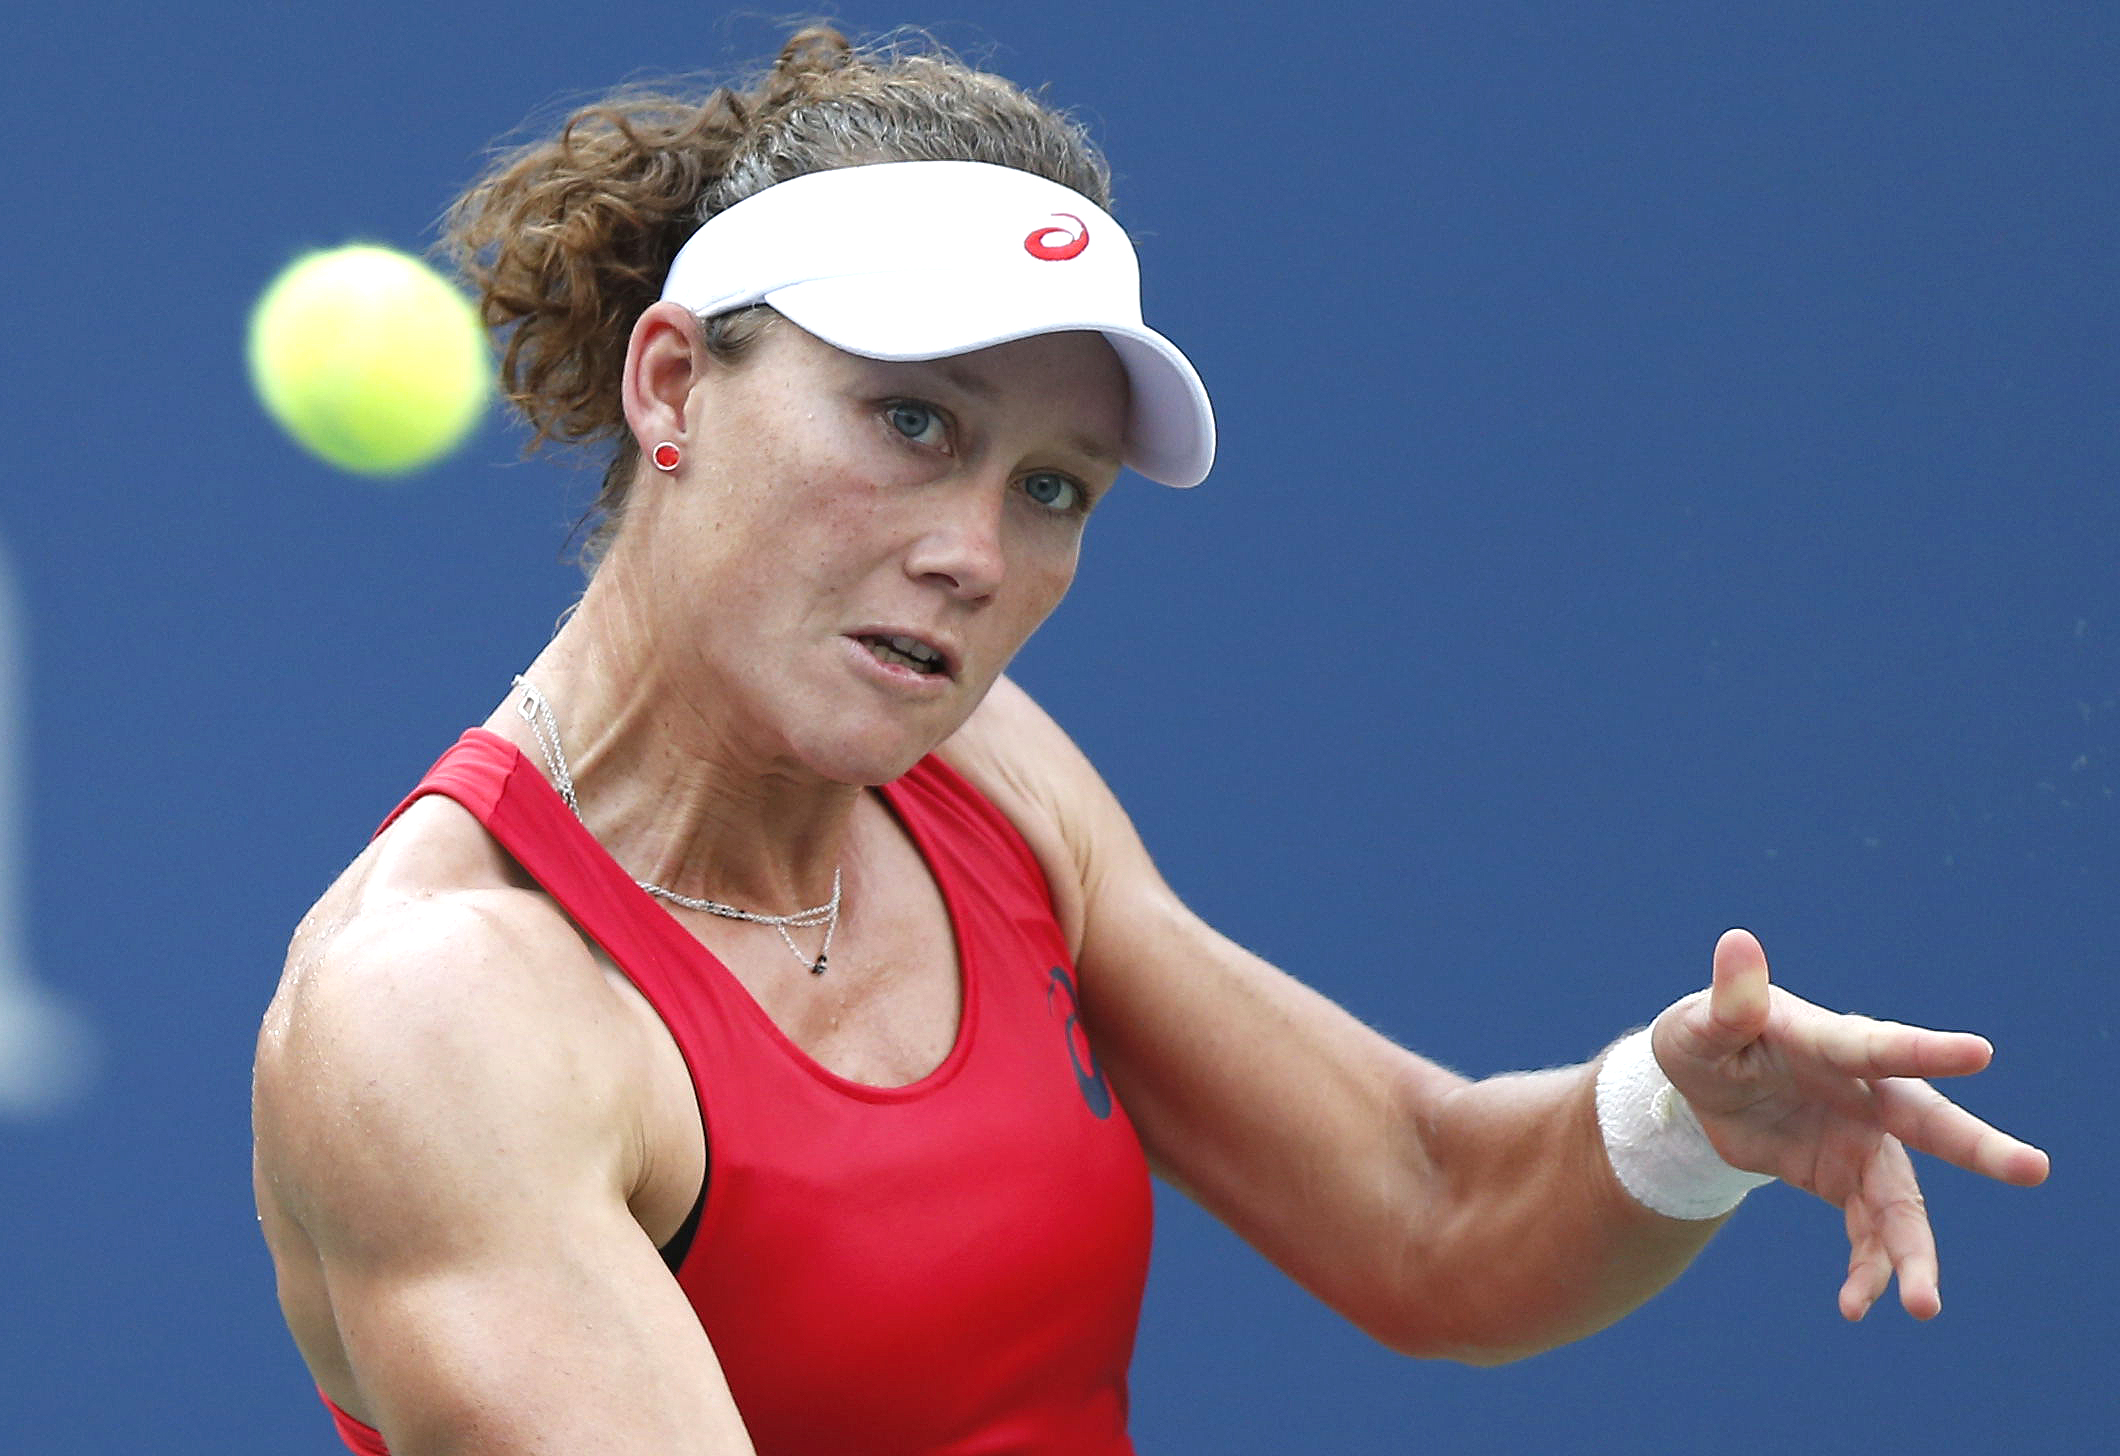 Samantha Stosur in action at the US Open, where she ran into eventual champion Flavia Pennetta in the fourth round. Photo: Xinhua